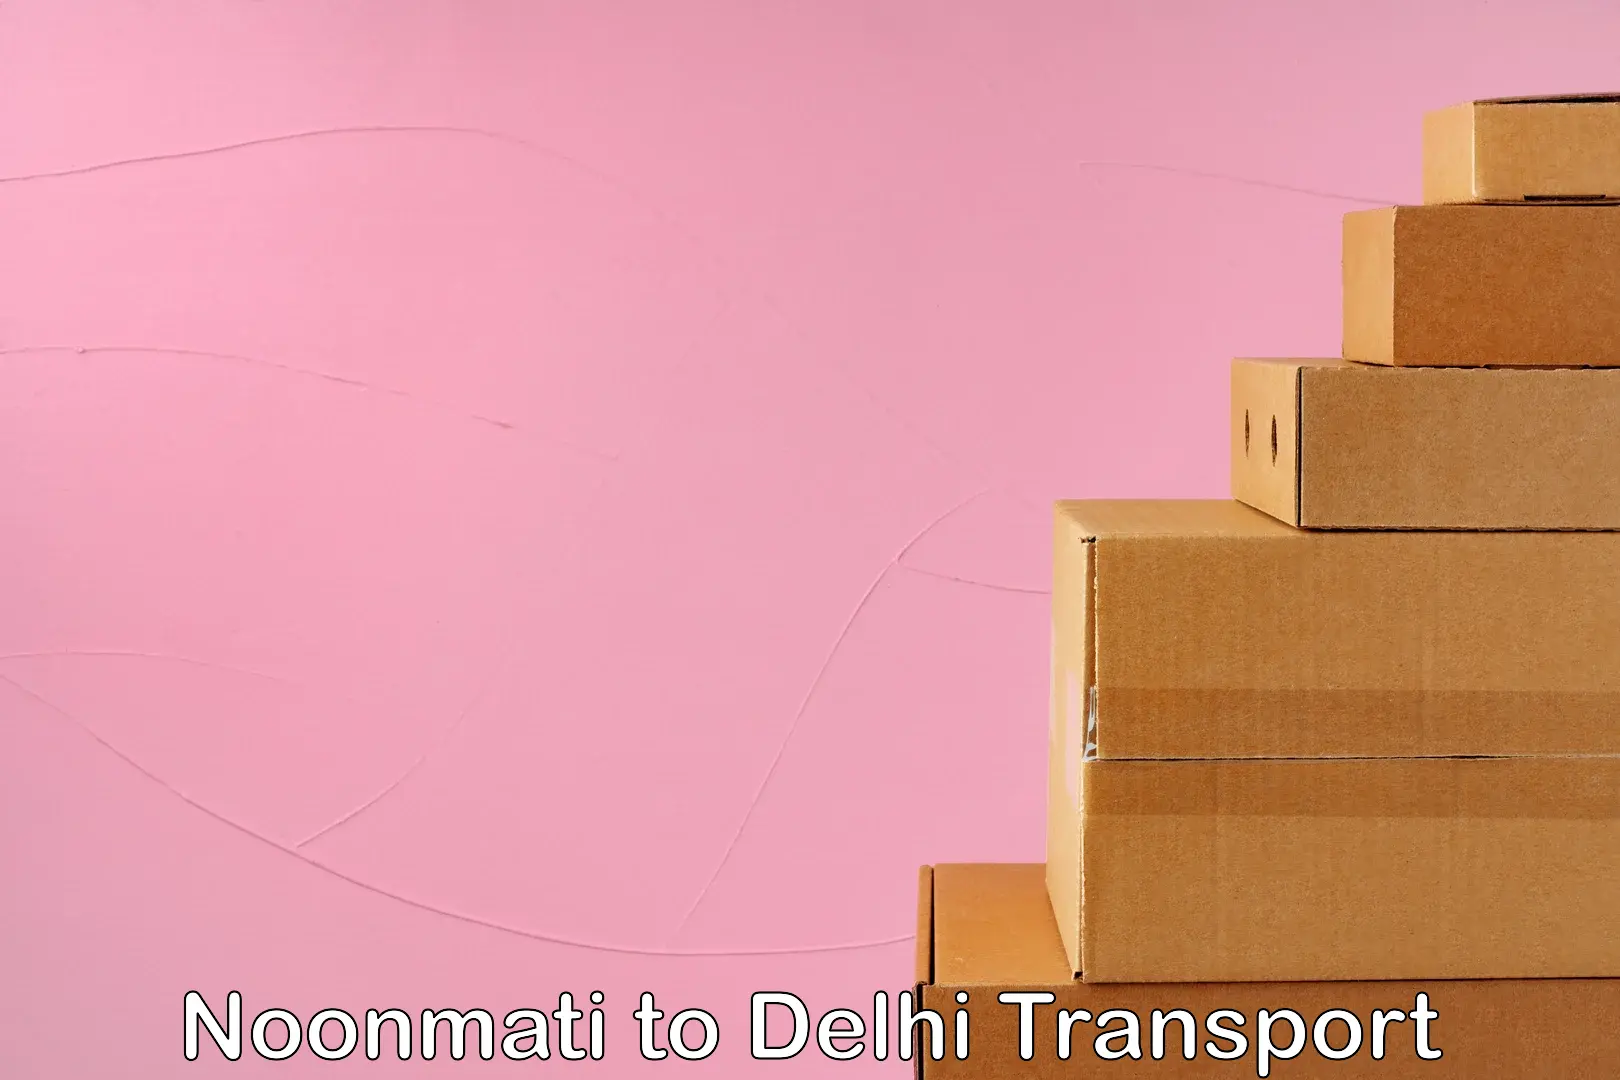 Truck transport companies in India in Noonmati to Delhi